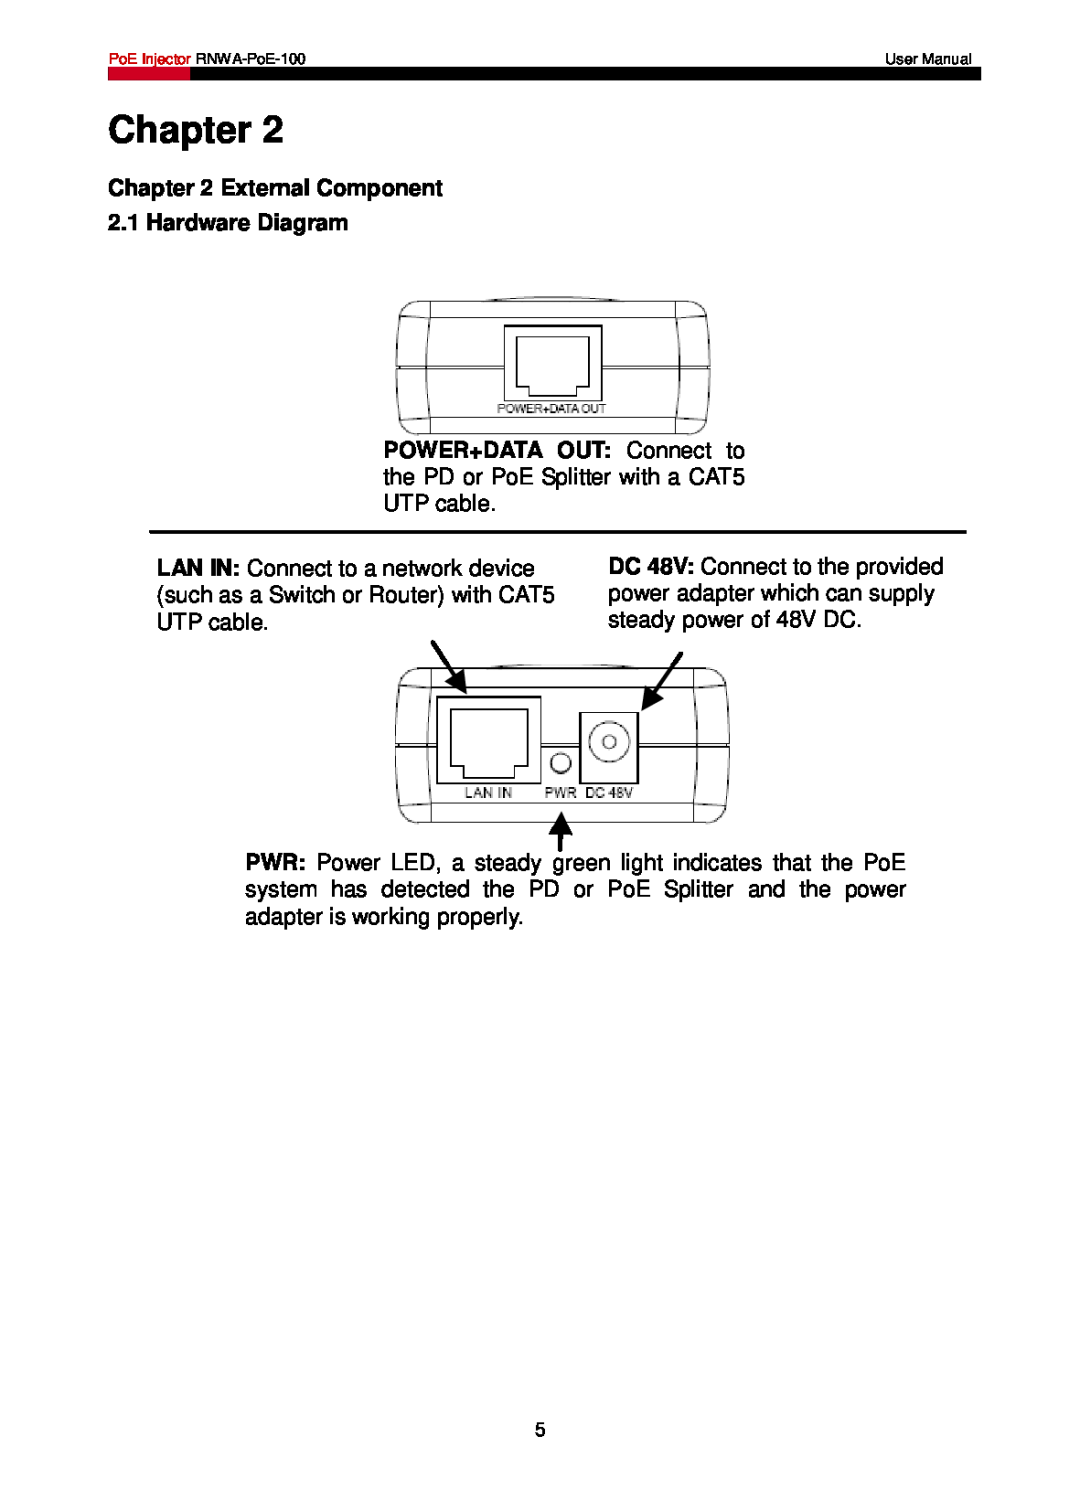 Rosewill RNWA-PoE-100 user manual External Component 2.1 Hardware Diagram, Chapter 